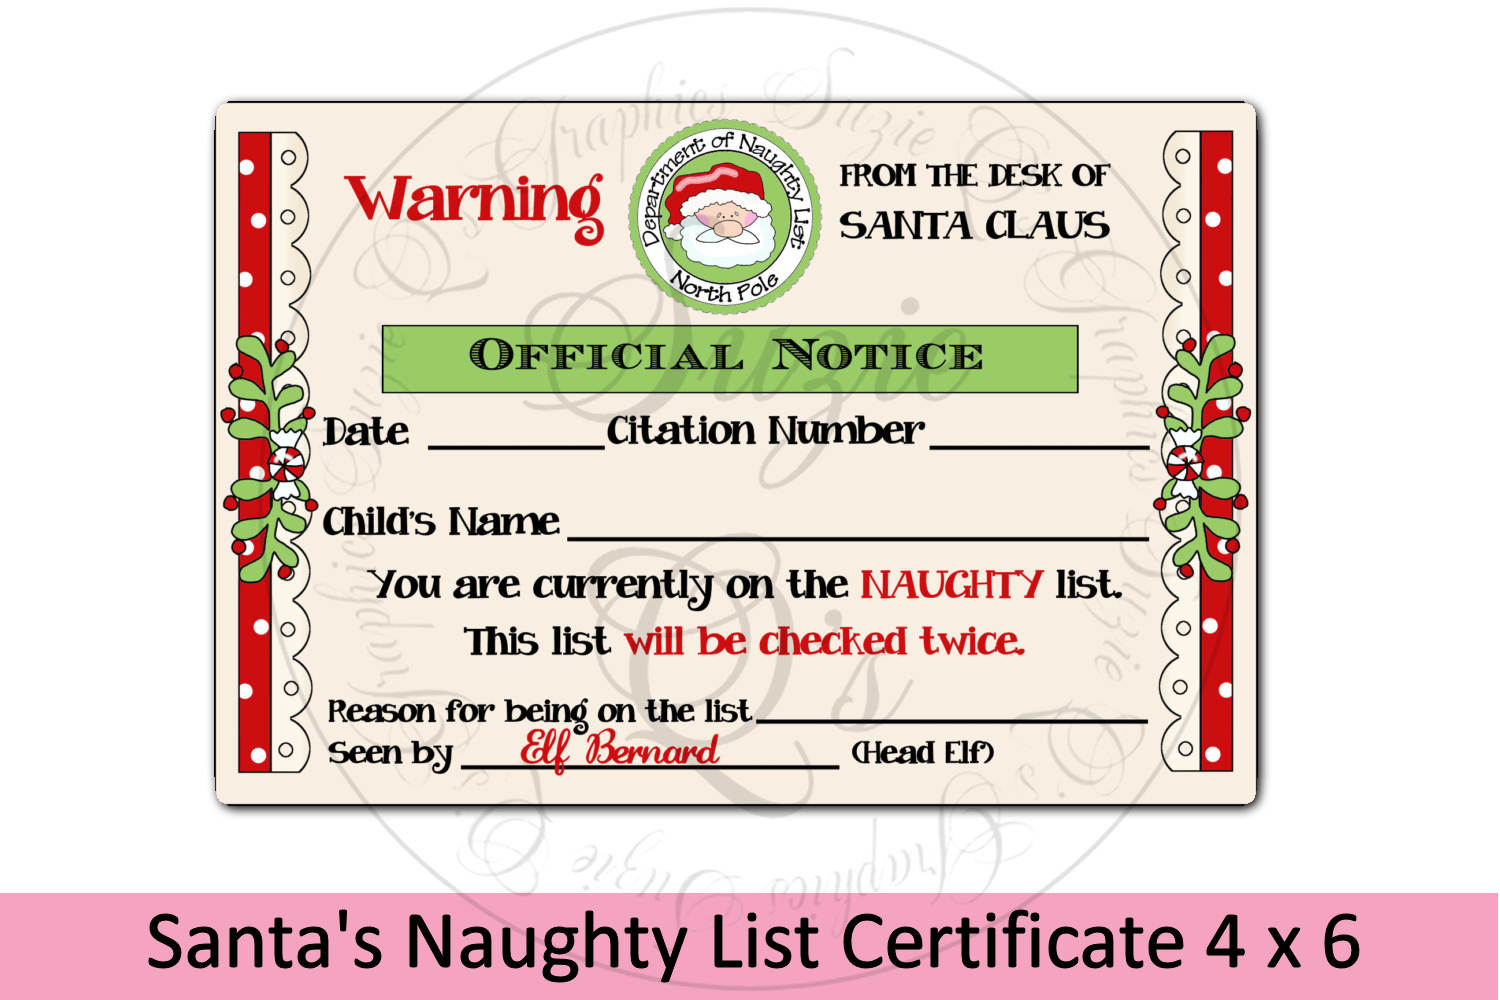 Santa's Naughty List Certificate 4 x 6 inches